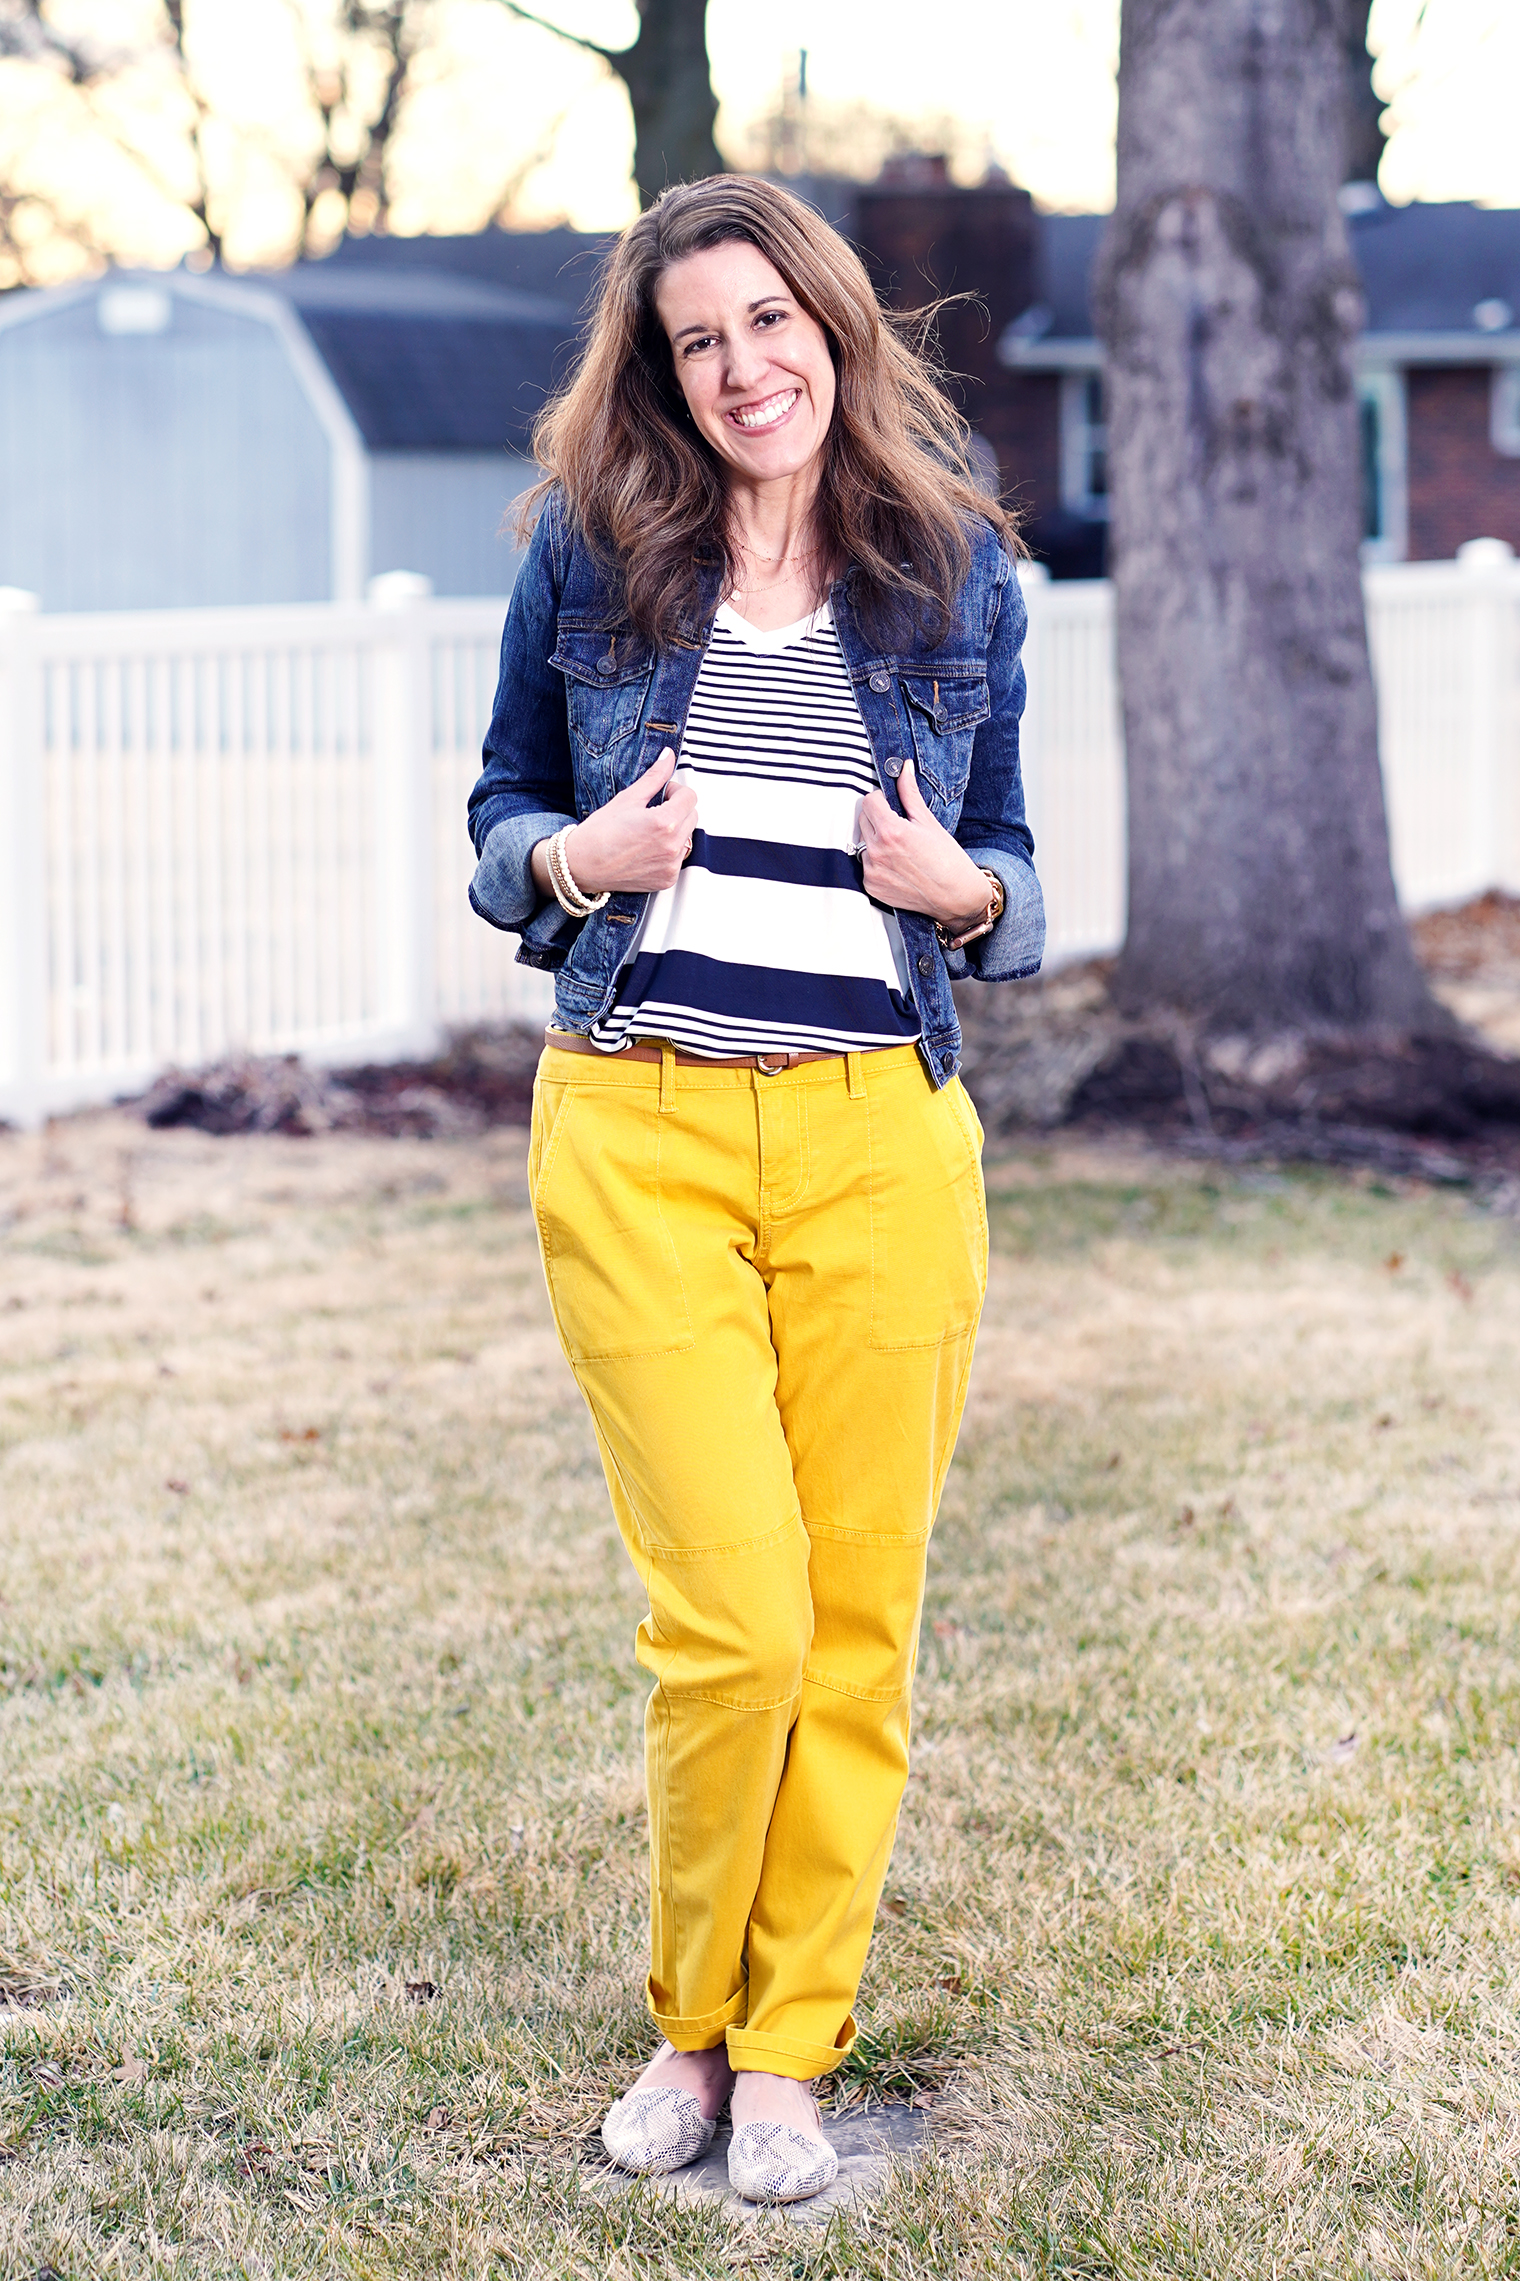 Mustard pants and teal blazer business casual | Colored pants outfits,  Business casual outfits, Mustard pants outfit